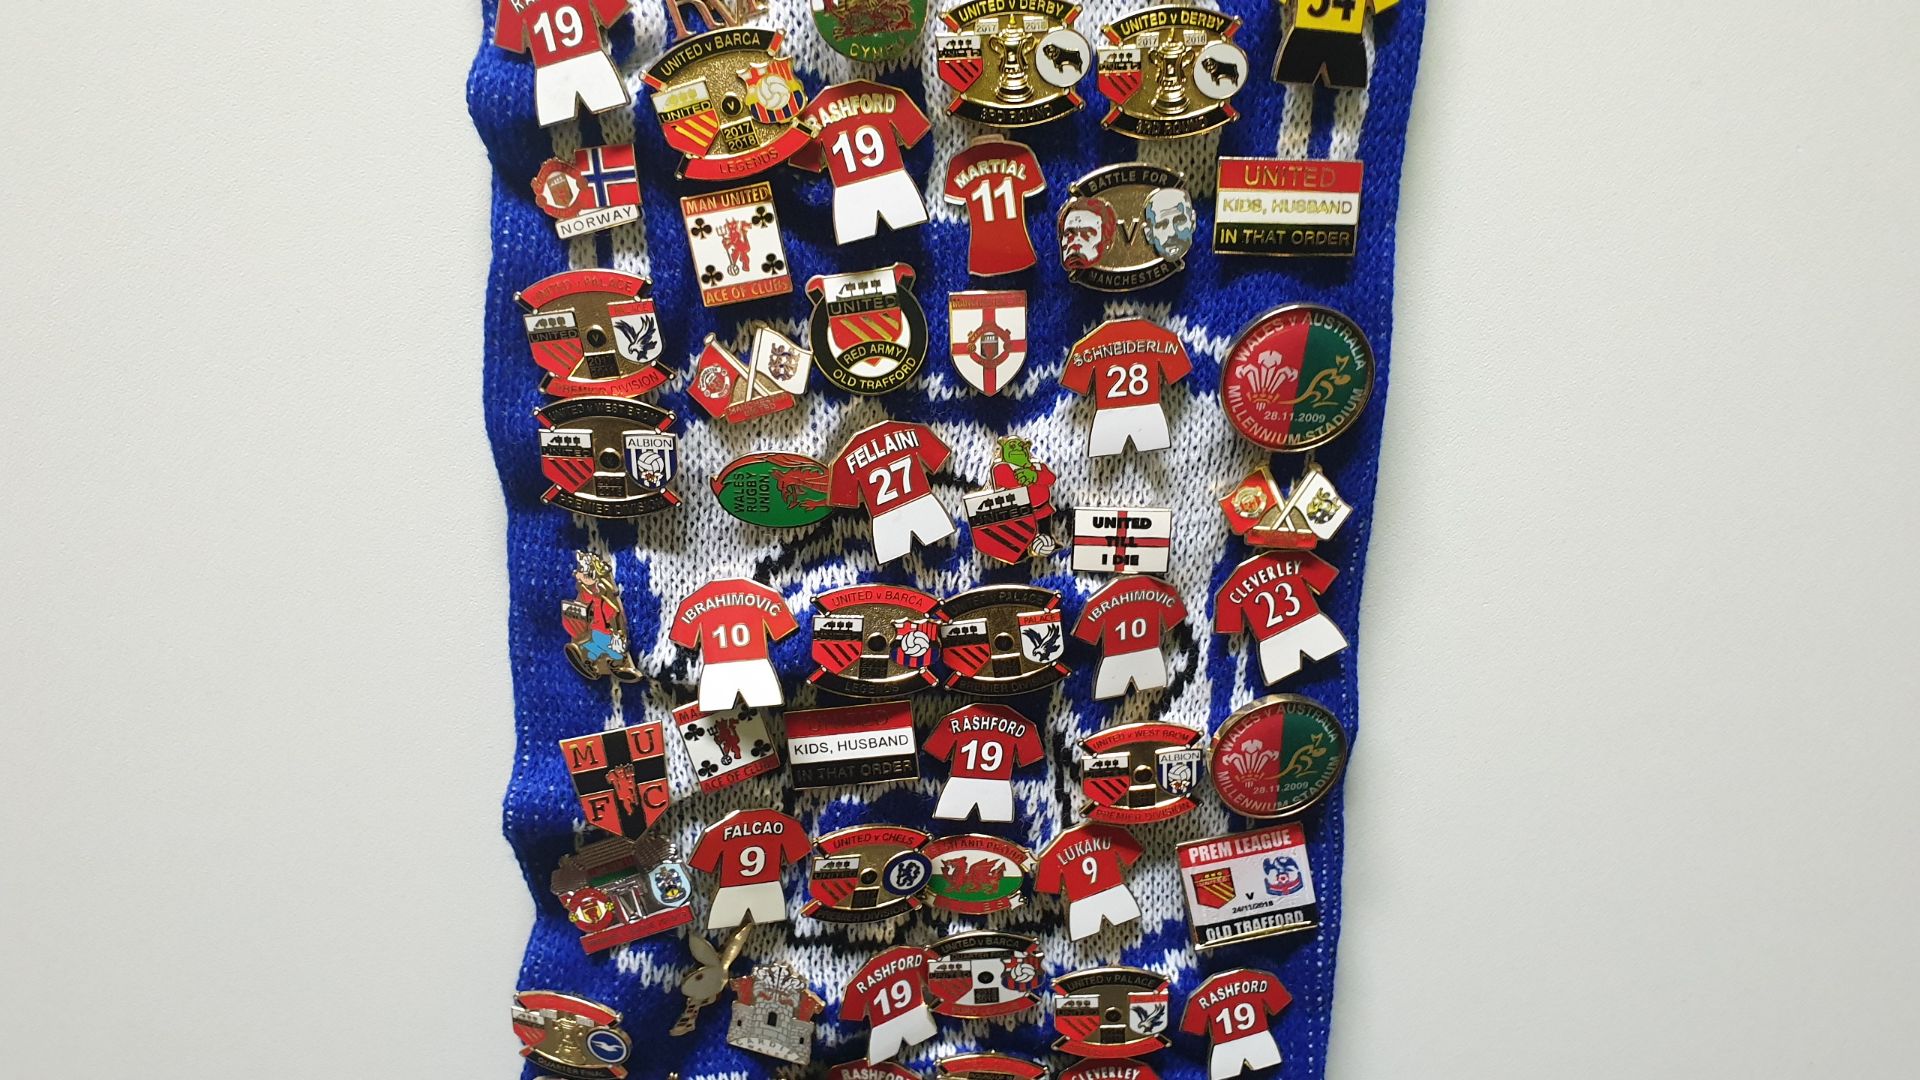 MANCHESTER UNITED SCARF CONTAINING APPROX 250 X PIN BADGES IE BATTLE FOR MANCHESTER, MUFC, - Image 7 of 8